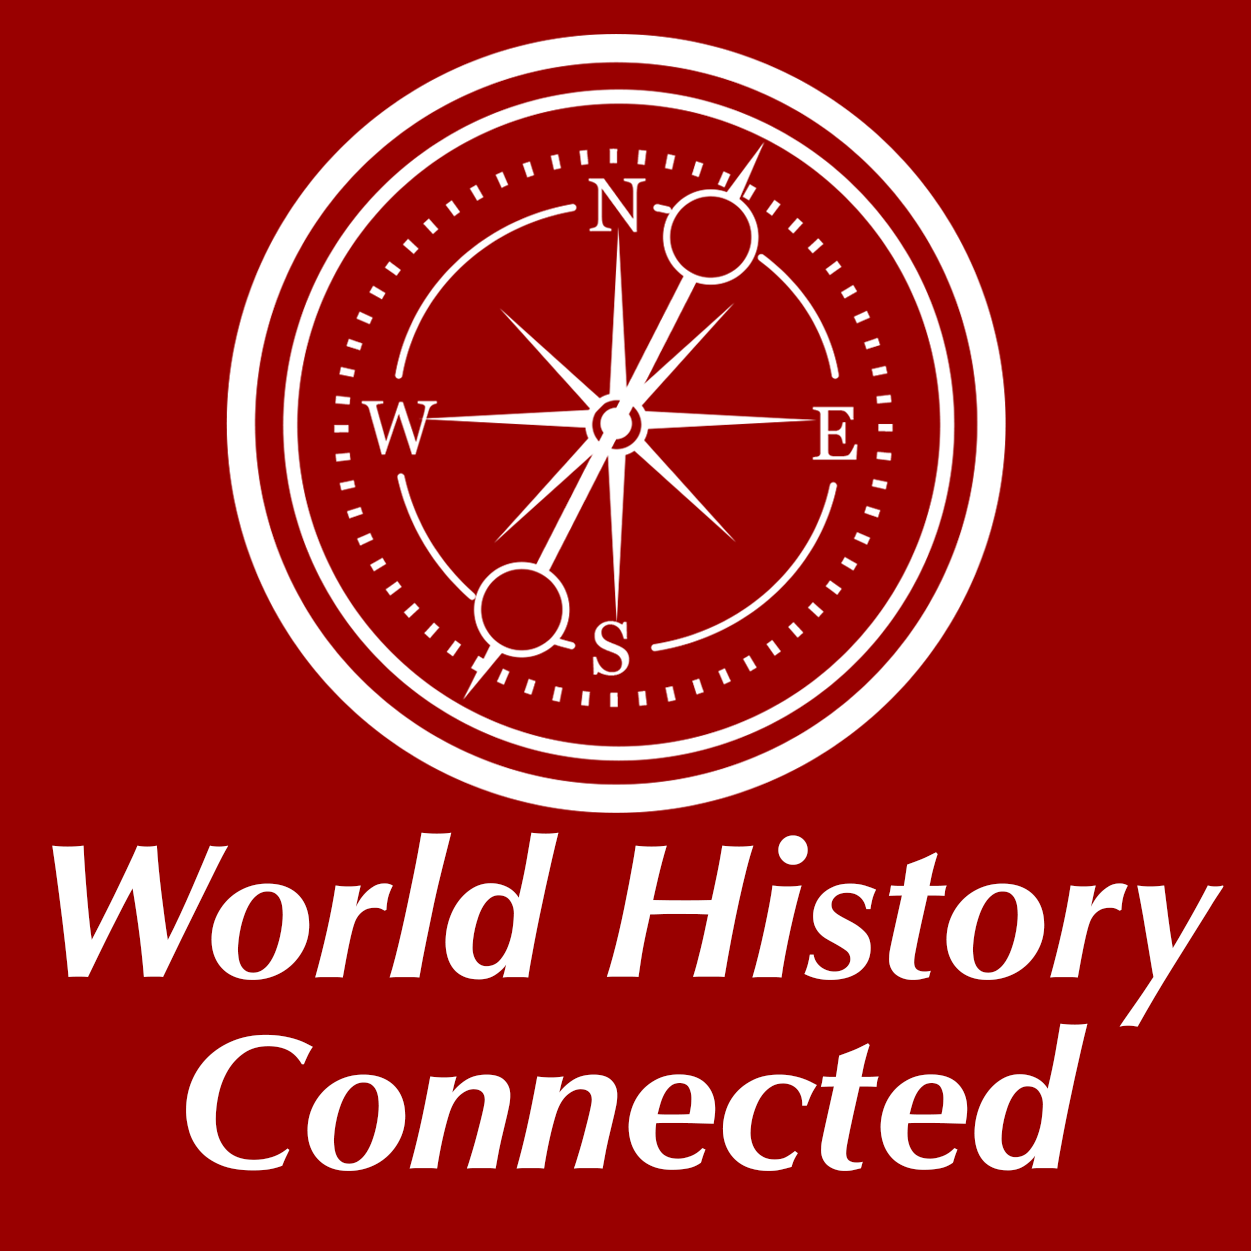 World History Connected logo